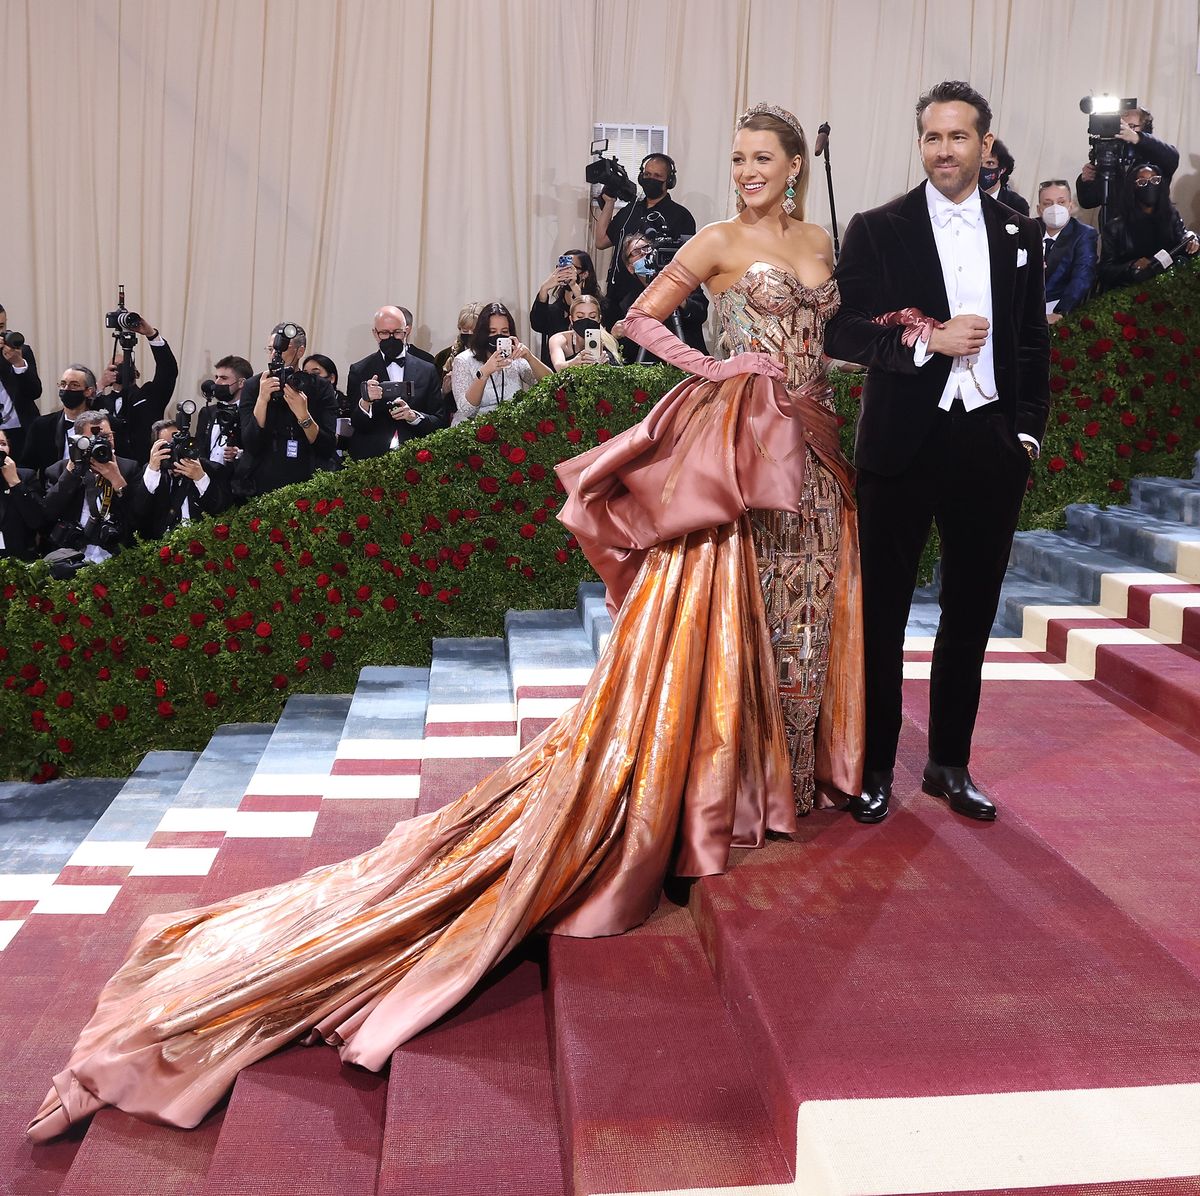 Met Gala 2022: The hottest red carpet arrivals